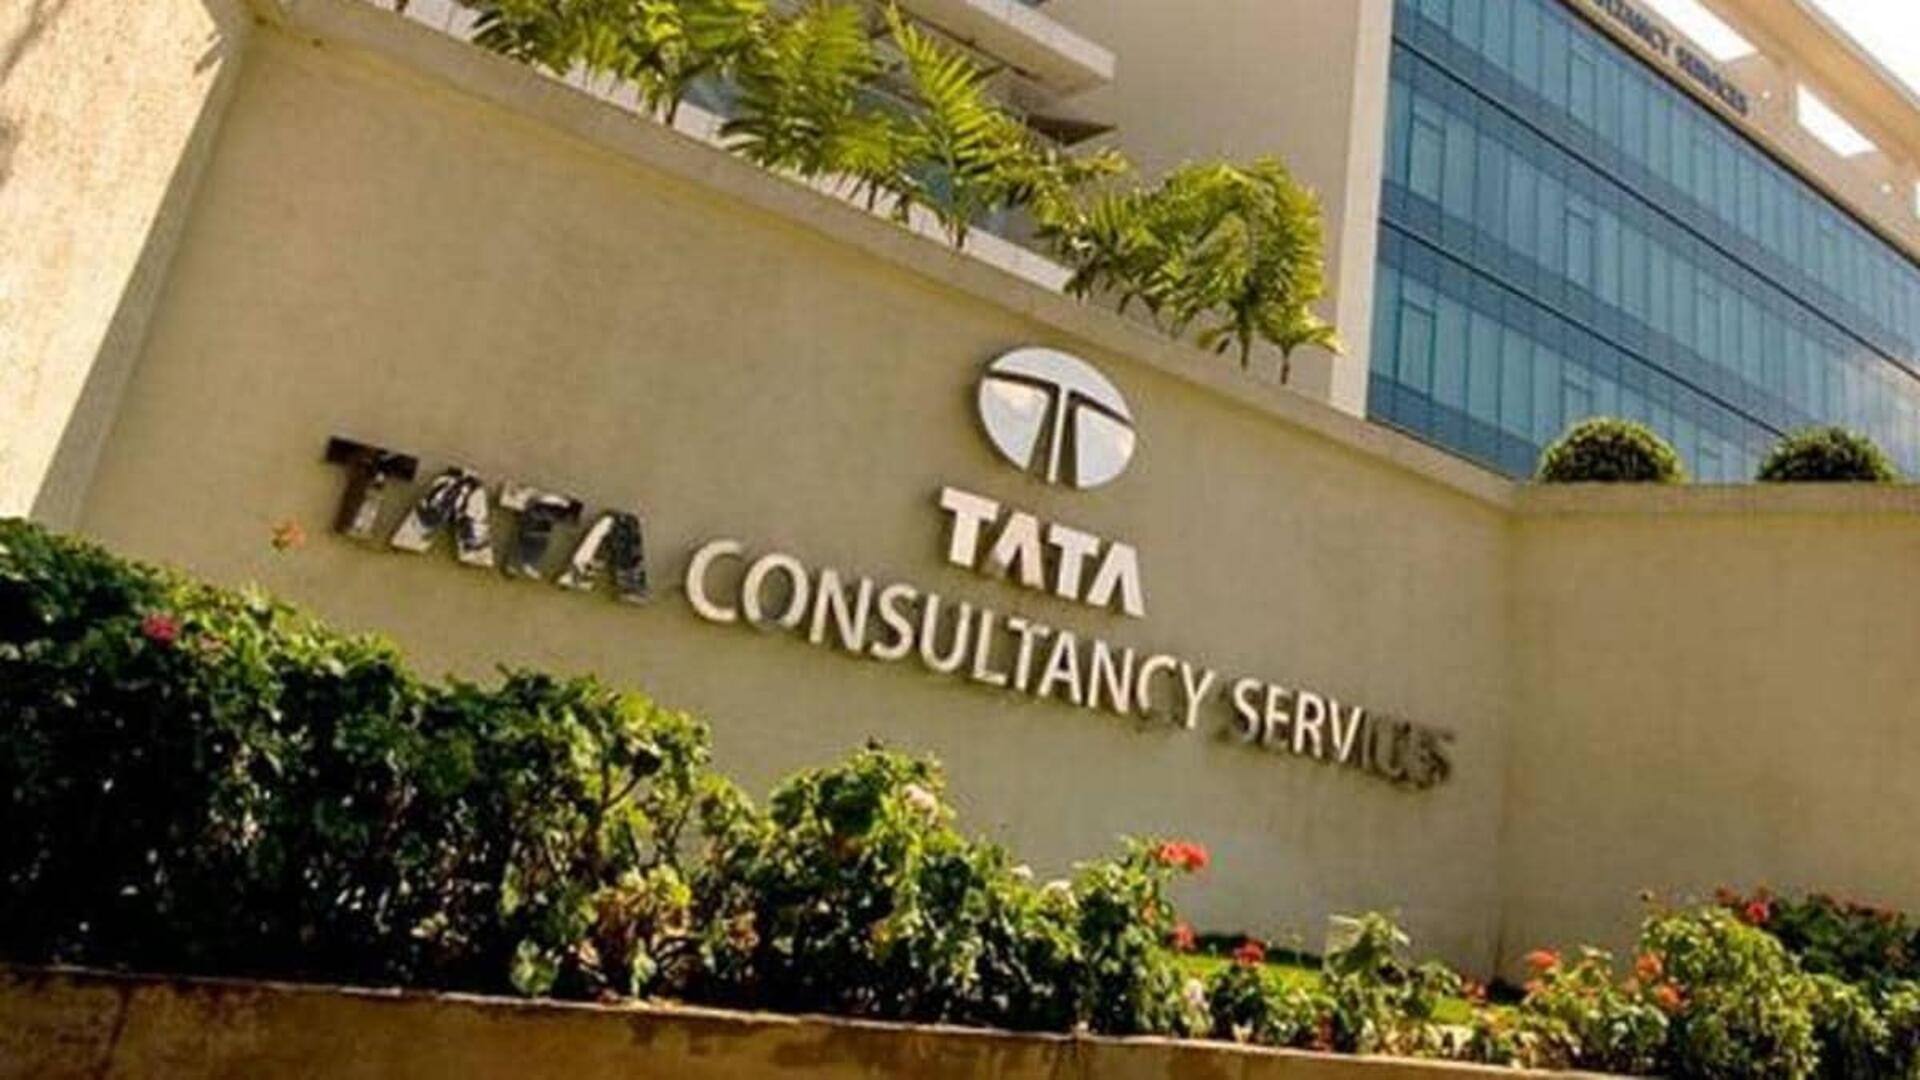 Tata to sell TCS shares worth Rs. 9,300cr: Here's why